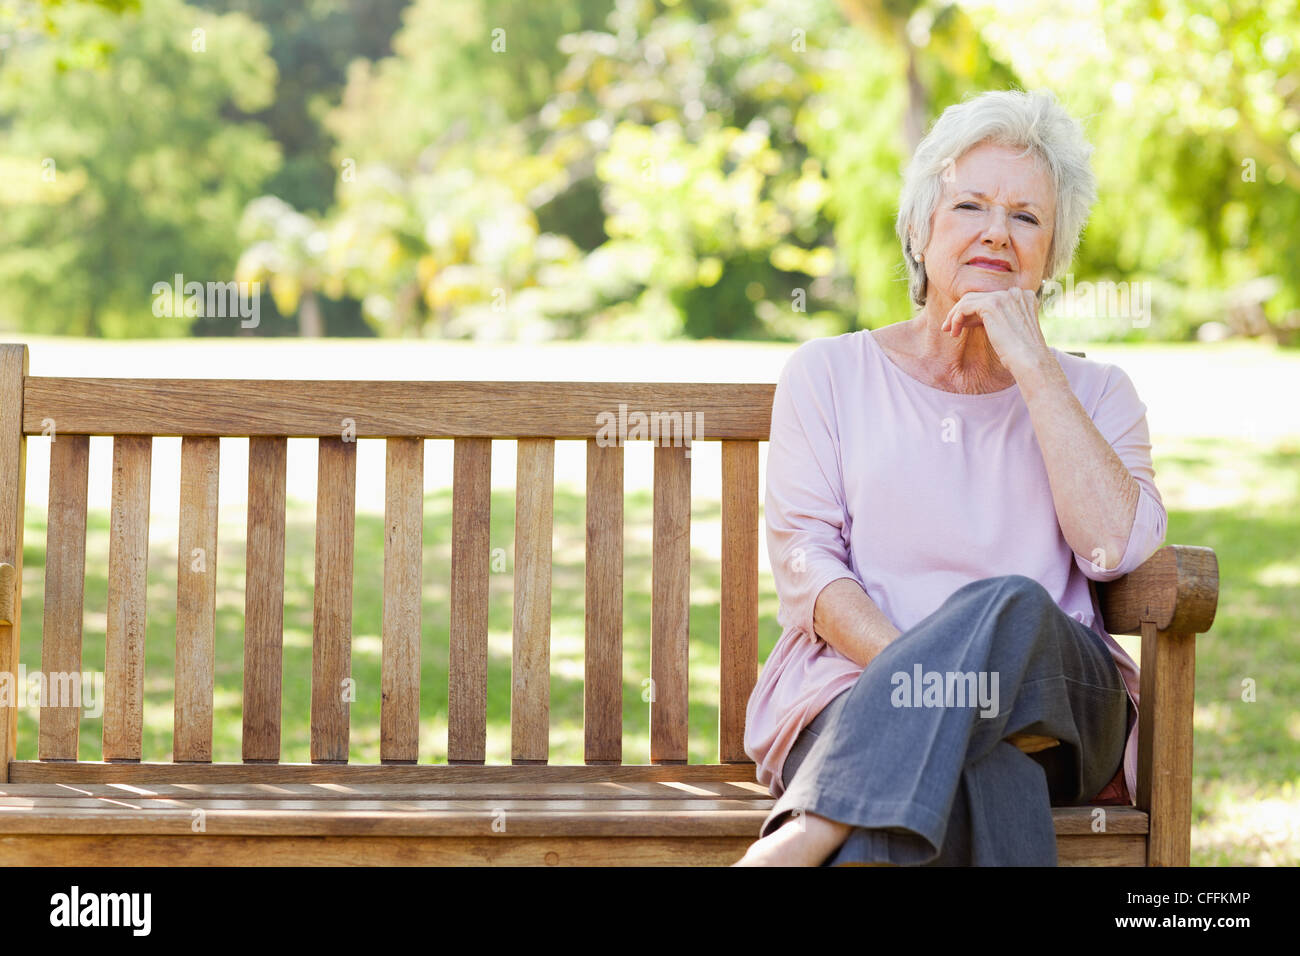 Woman looking ahead thoughtfully while sitting on a bench Stock Photo